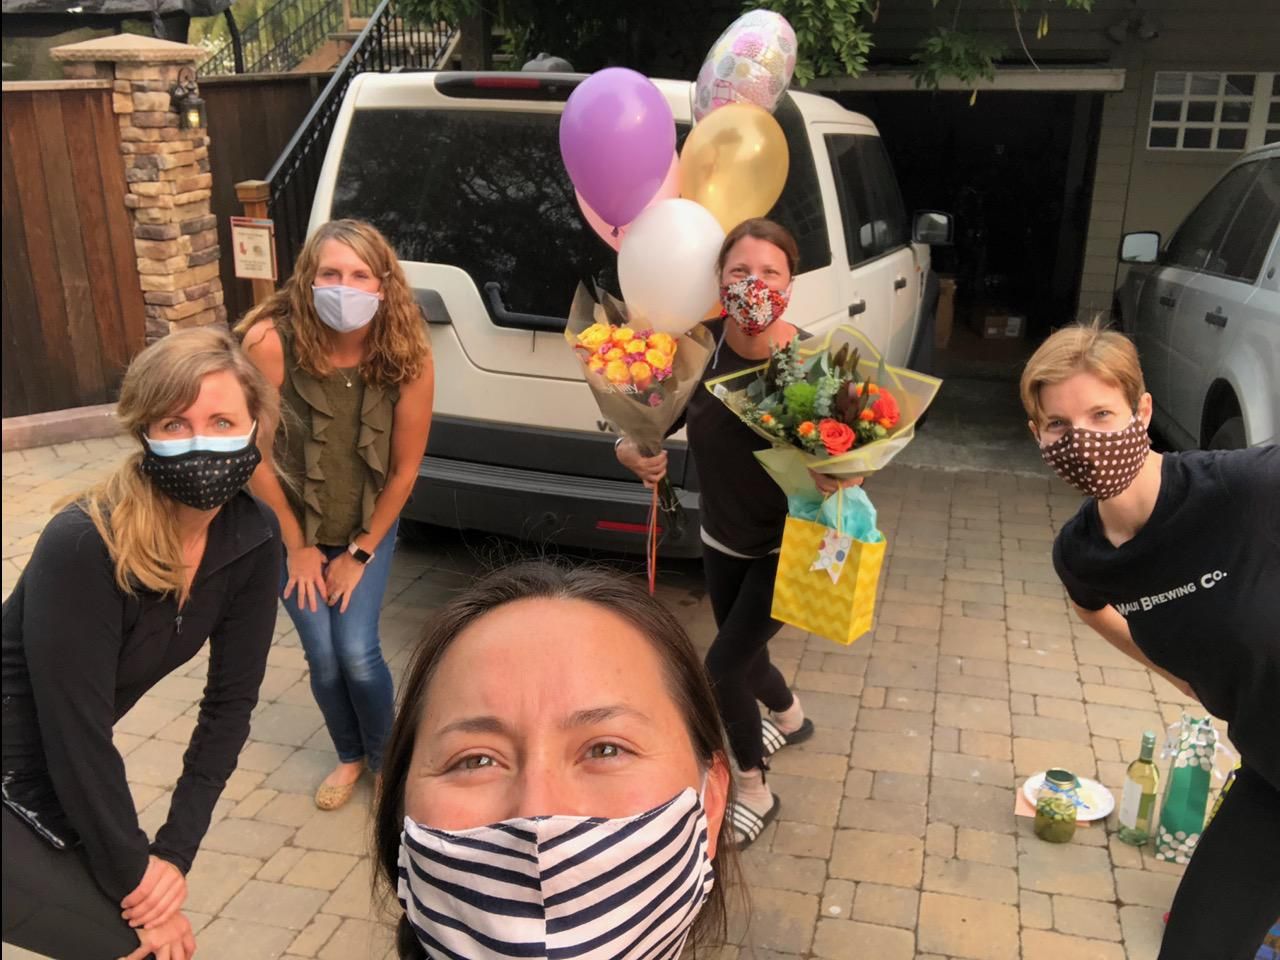 Jacque\u2019s friends \u2014 with balloons! 2020